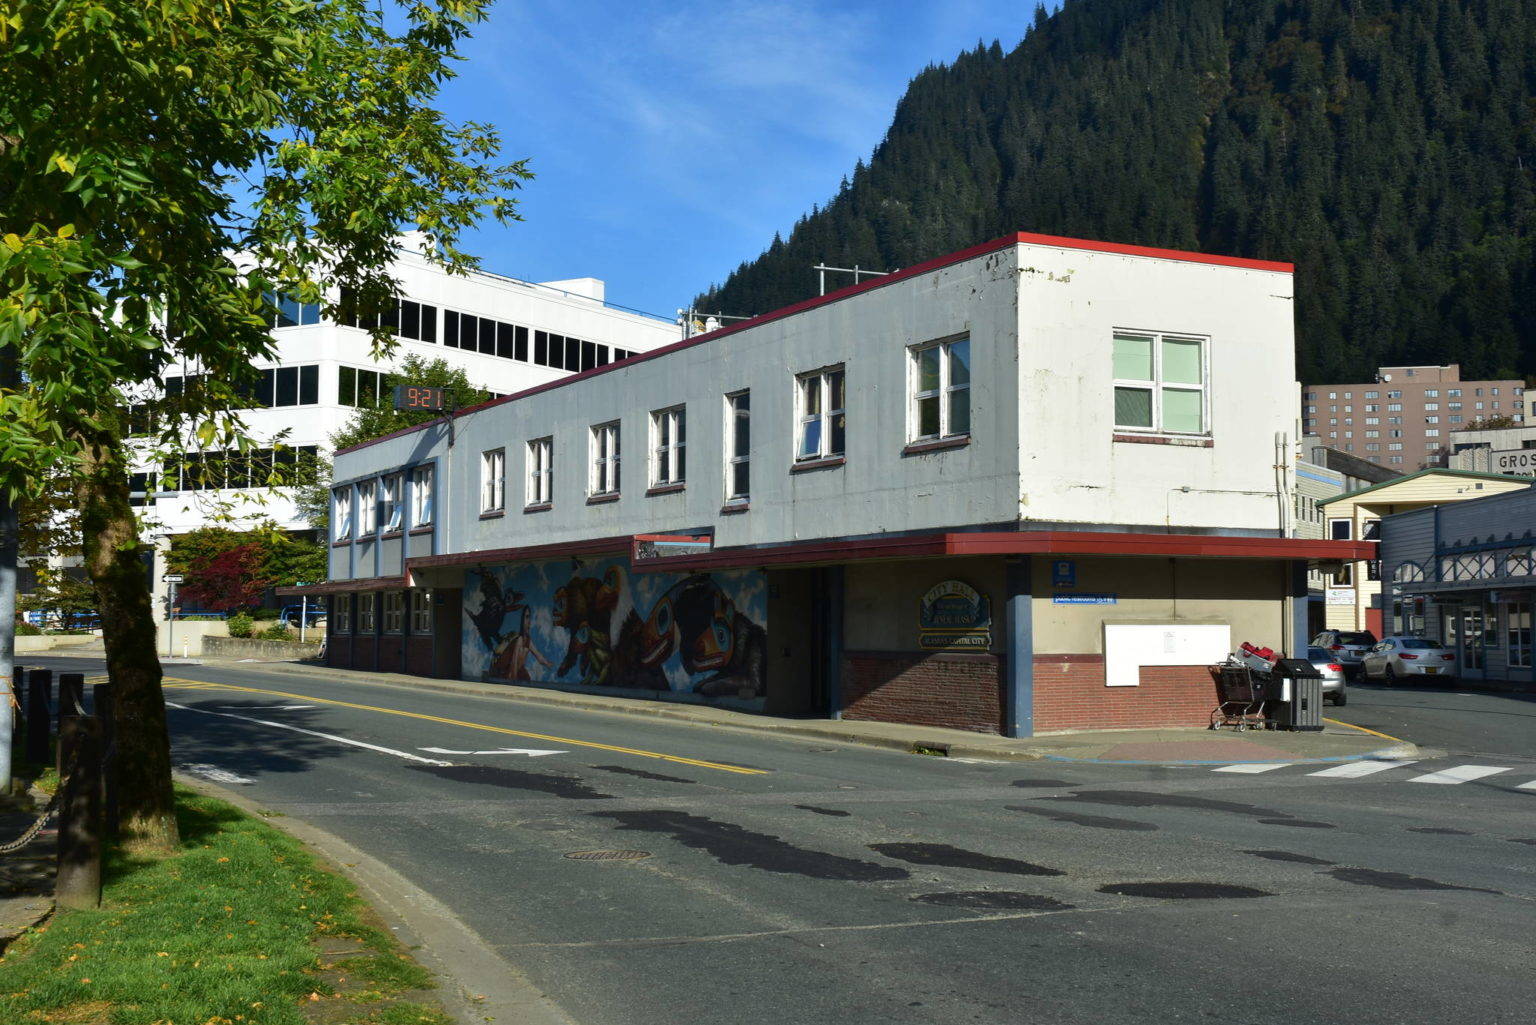 Juneau City Hall on Tuesday, Sept. 15, 2020. The City and Borough of Juneau Assembly added an additional $2 million in CARES Act money to the city's small business grant program, allowing the next phase of the program to begin sooner. (Peter Segall / Juneau Empire)